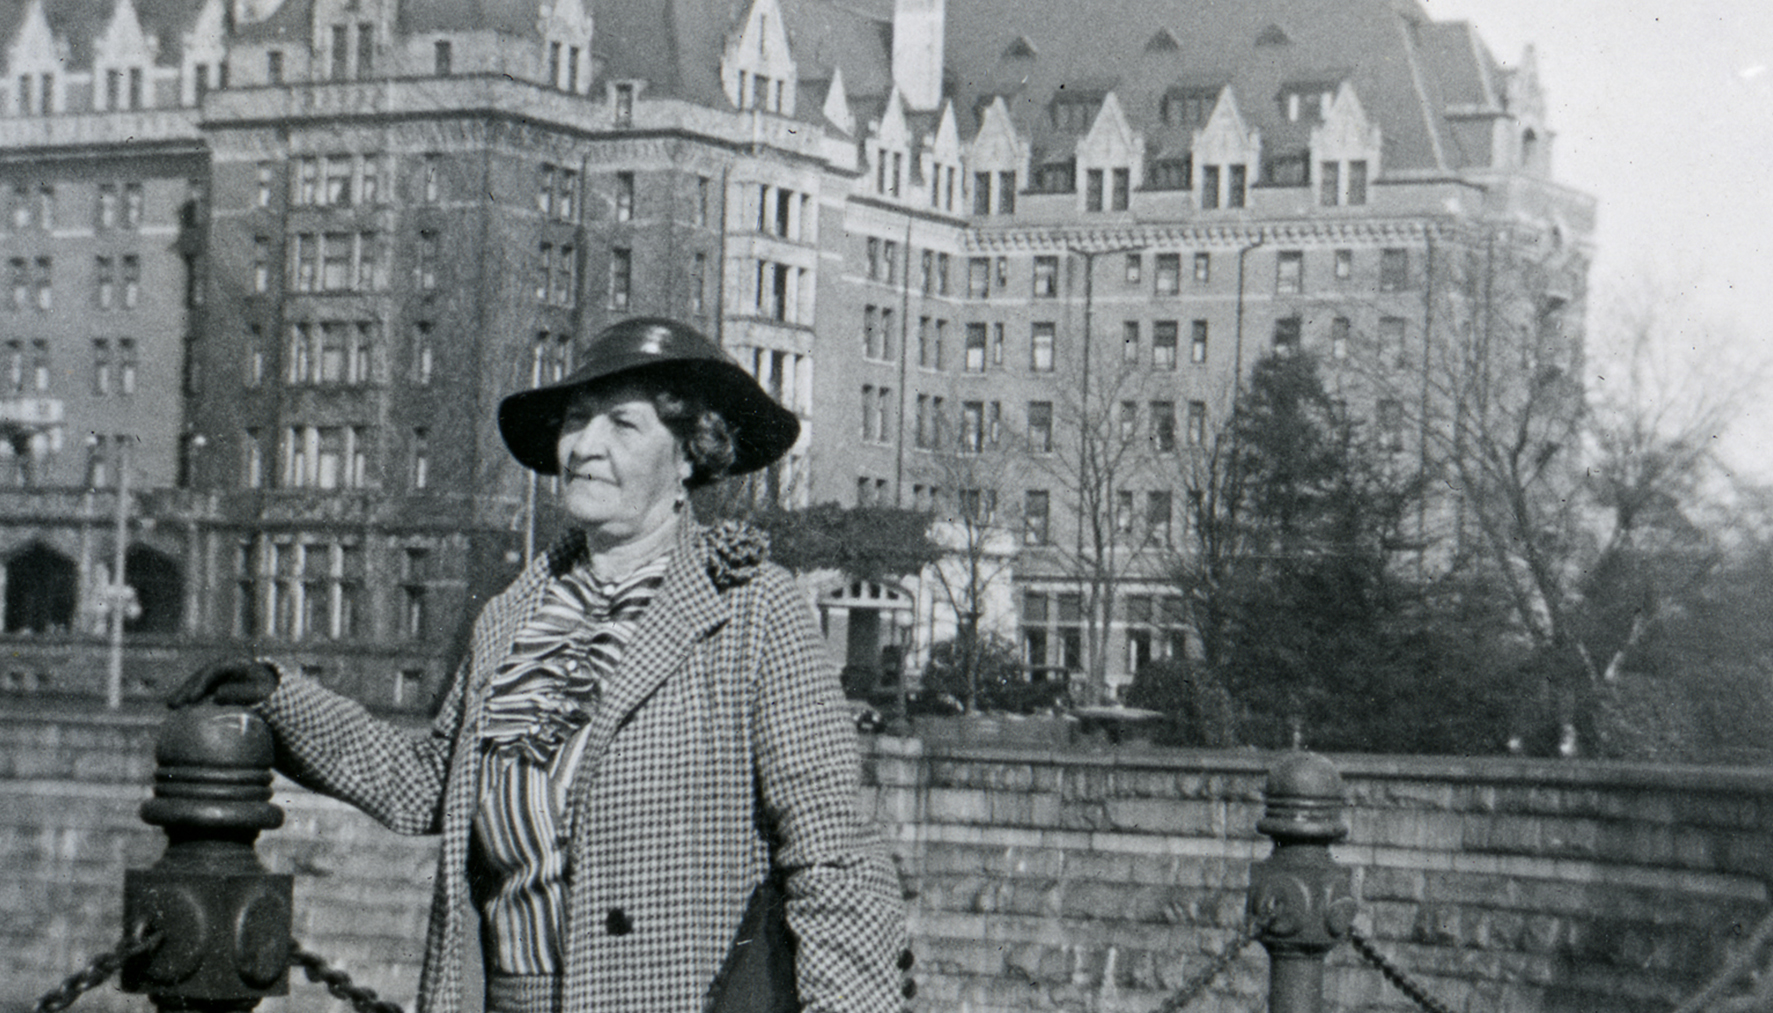 Florence Cottingham at the Fairmont Empress Hotel in Victoria, BC, ca. 1932